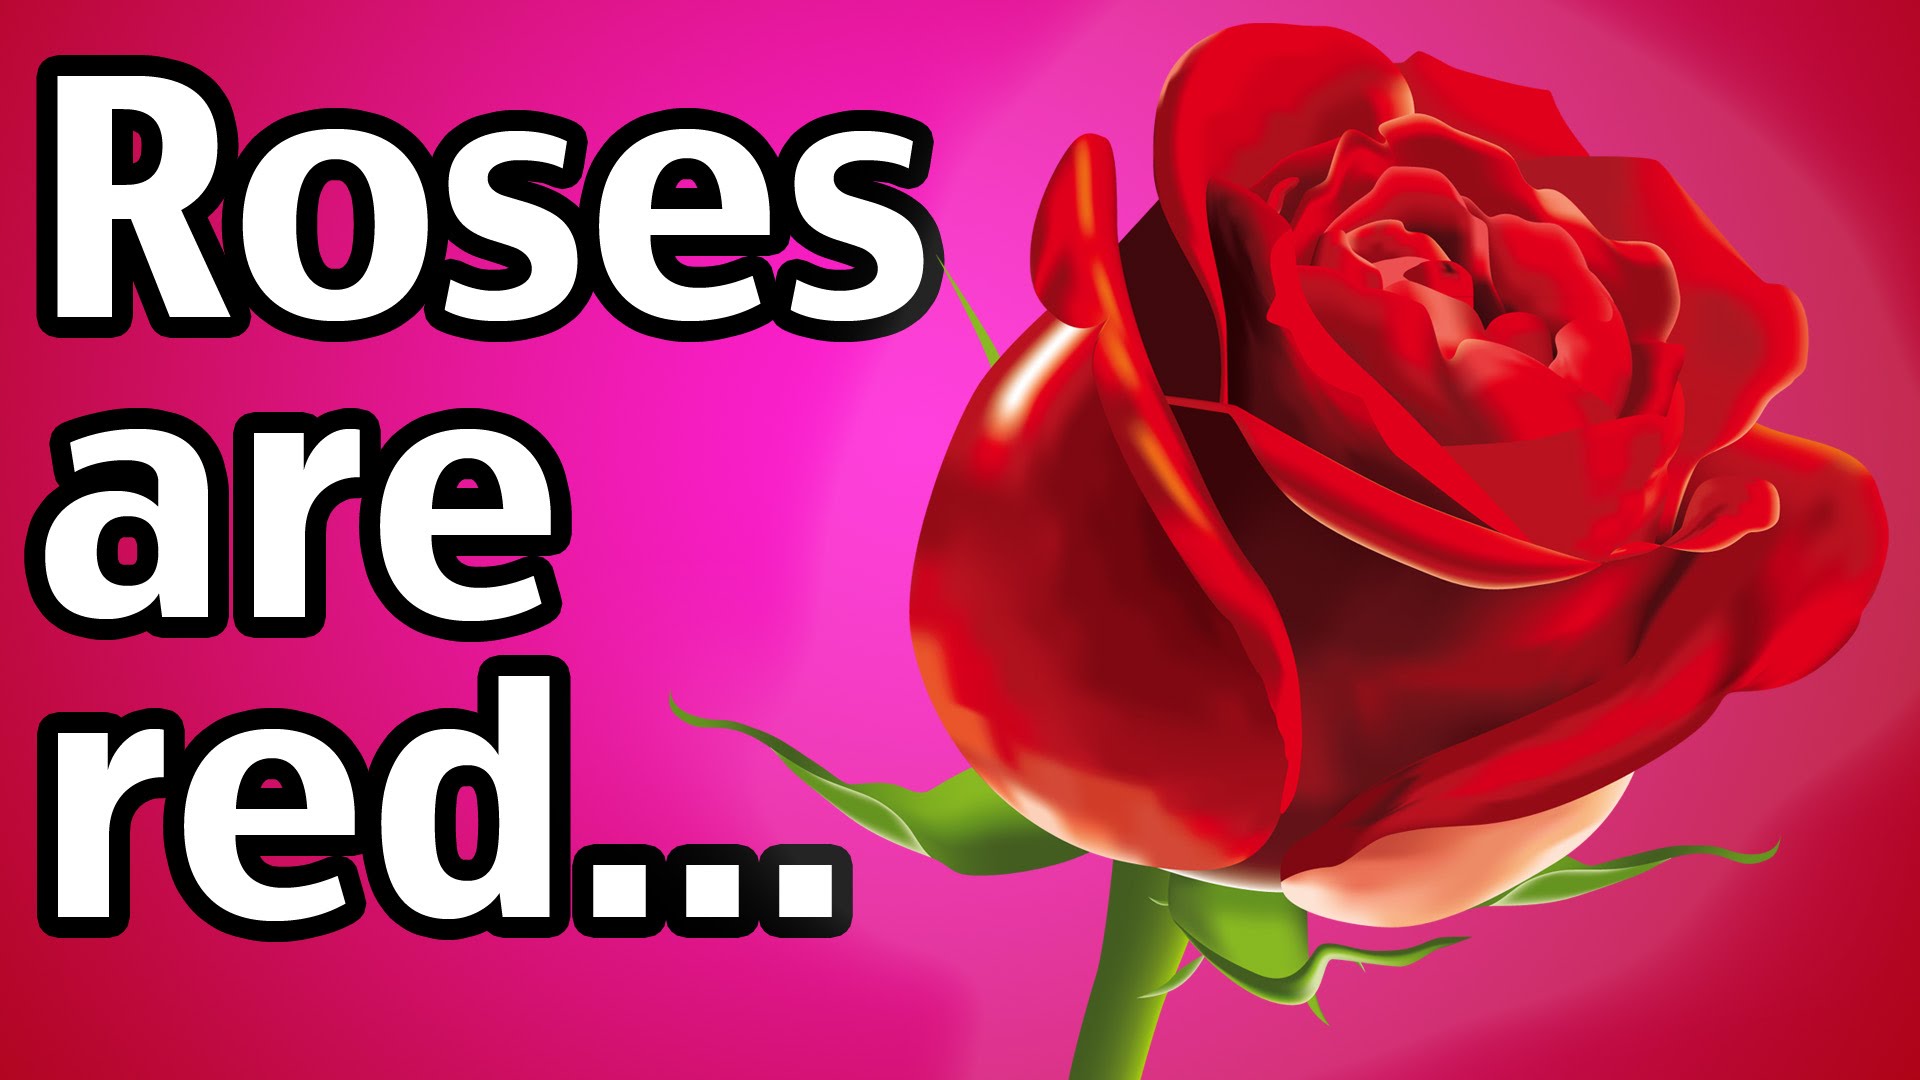 ROSES ARE RED... (YIAY #10) - YouTube